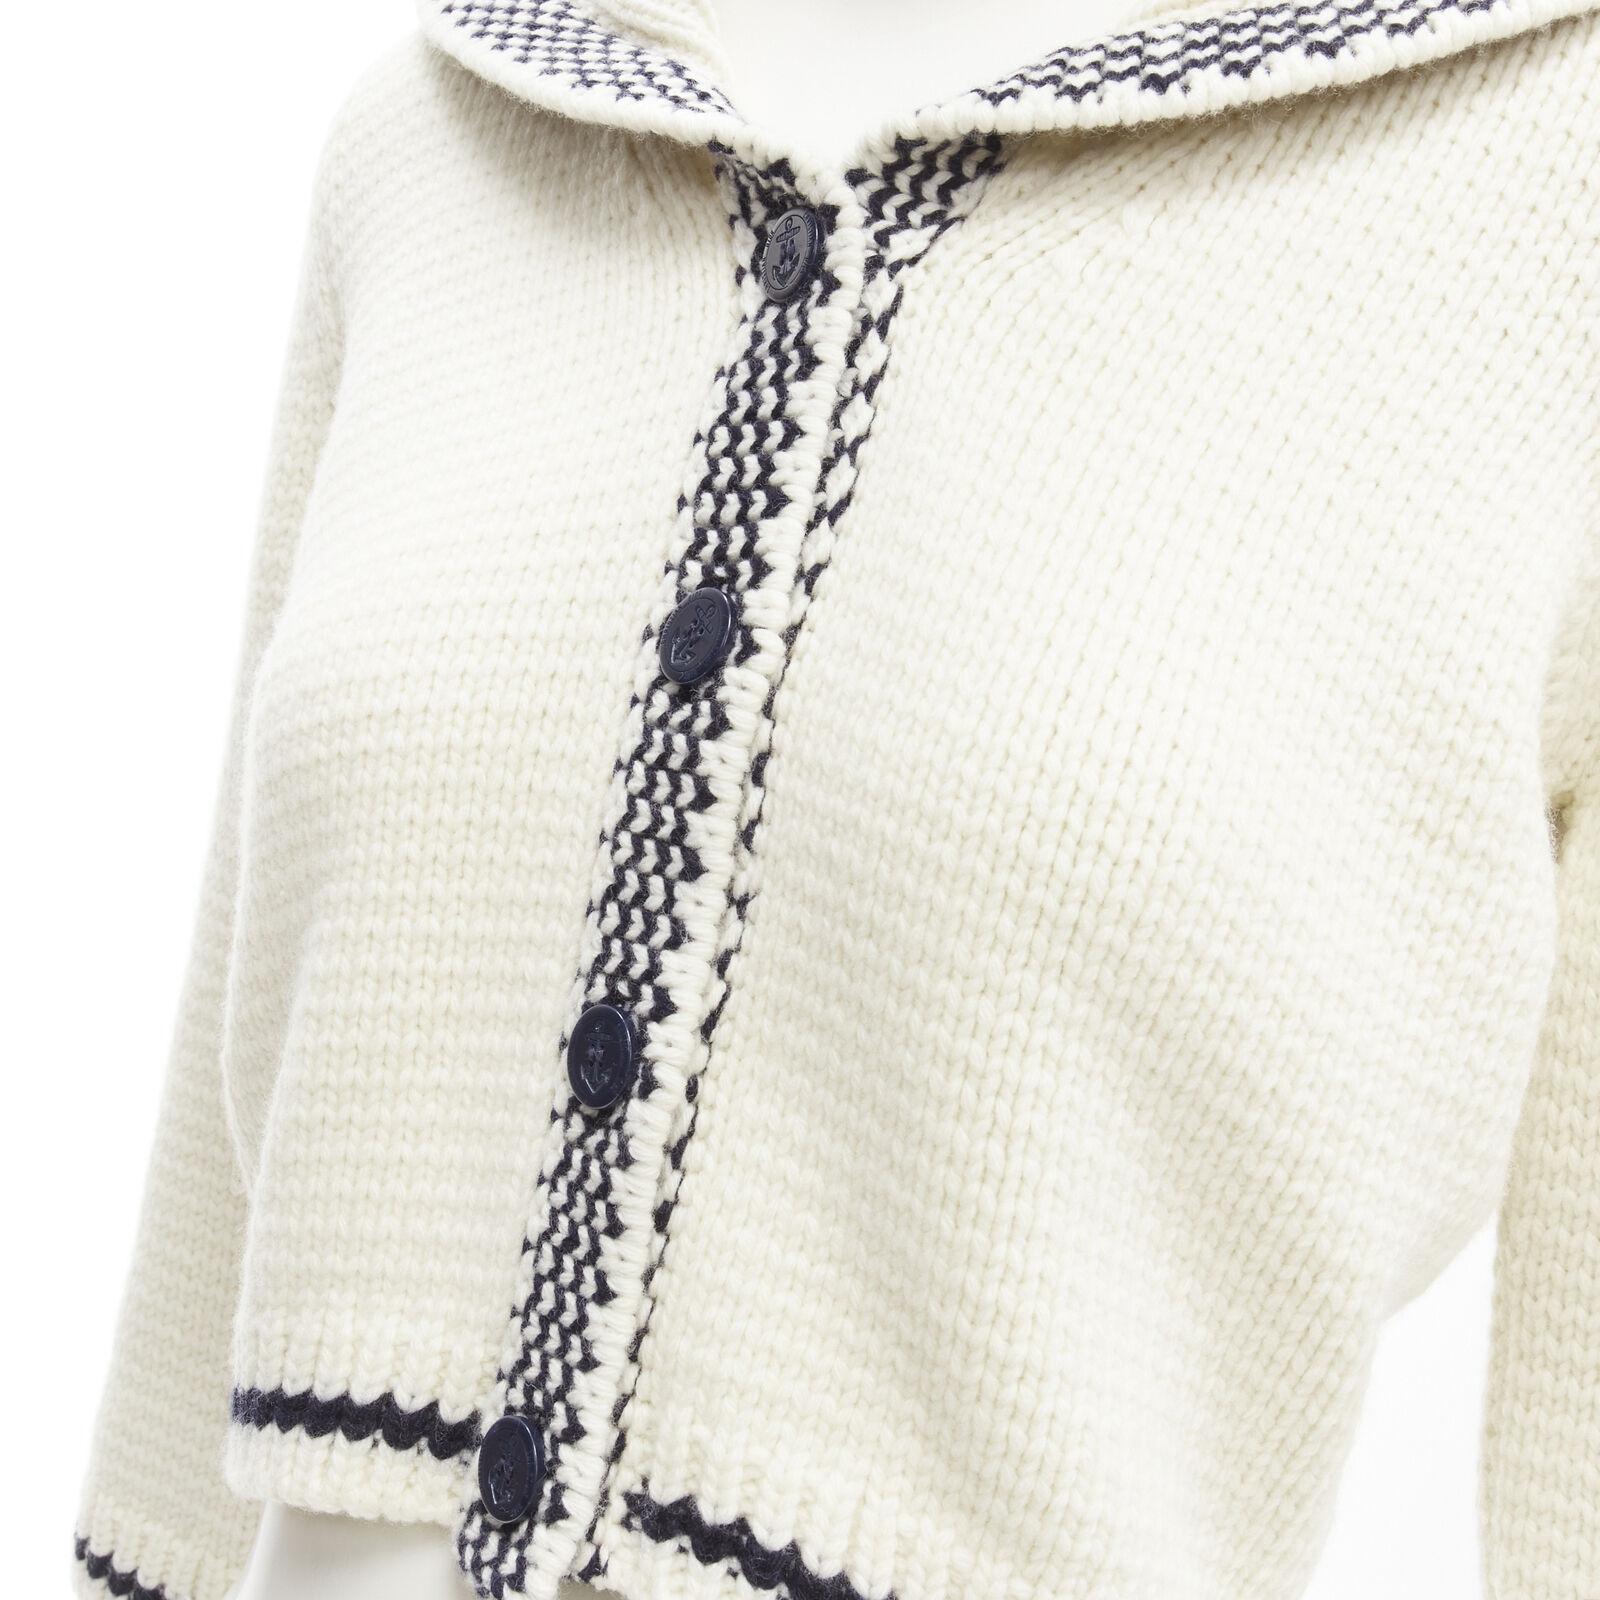 CHRISTIAN DIOR 2021 Mariniere wool cashmere beige sailor collar cardigan FR34 XS
Reference: AAWC/A00249
Brand: Christian Dior
Designer: Maria Grazia Chiuri
Collection: 2021 - Runway
Material: Virgin Wool, Cashmere
Color: Beige, Navy
Pattern: